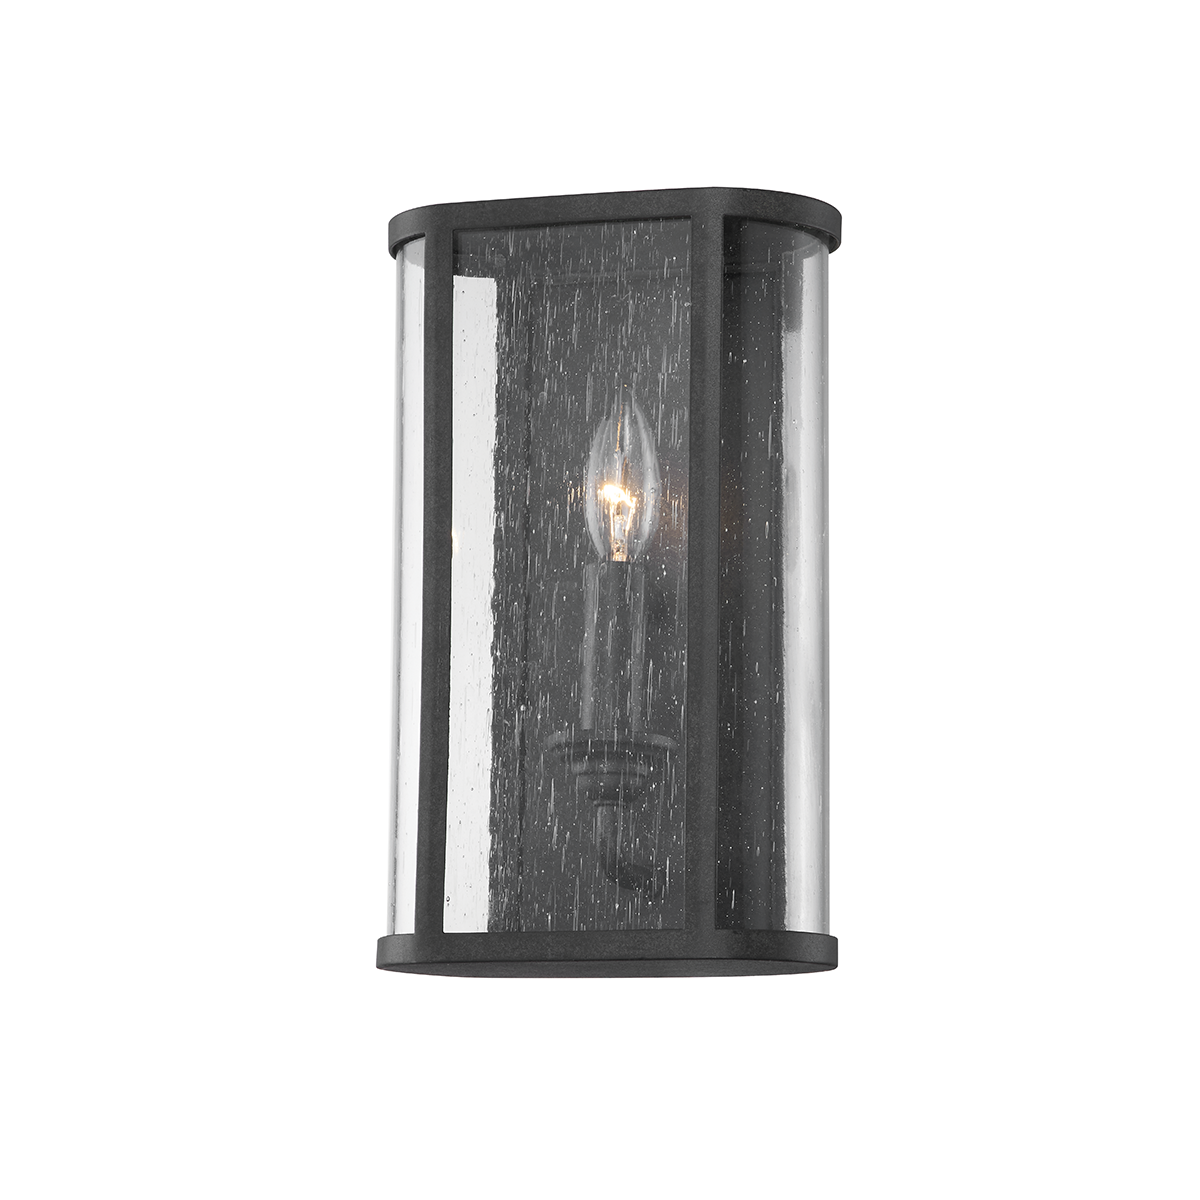 Troy Lighting 1 LIGHT SMALL EXTERIOR WALL SCONCE B3401 Outdoor l Wall Troy Lighting FORGED IRON  